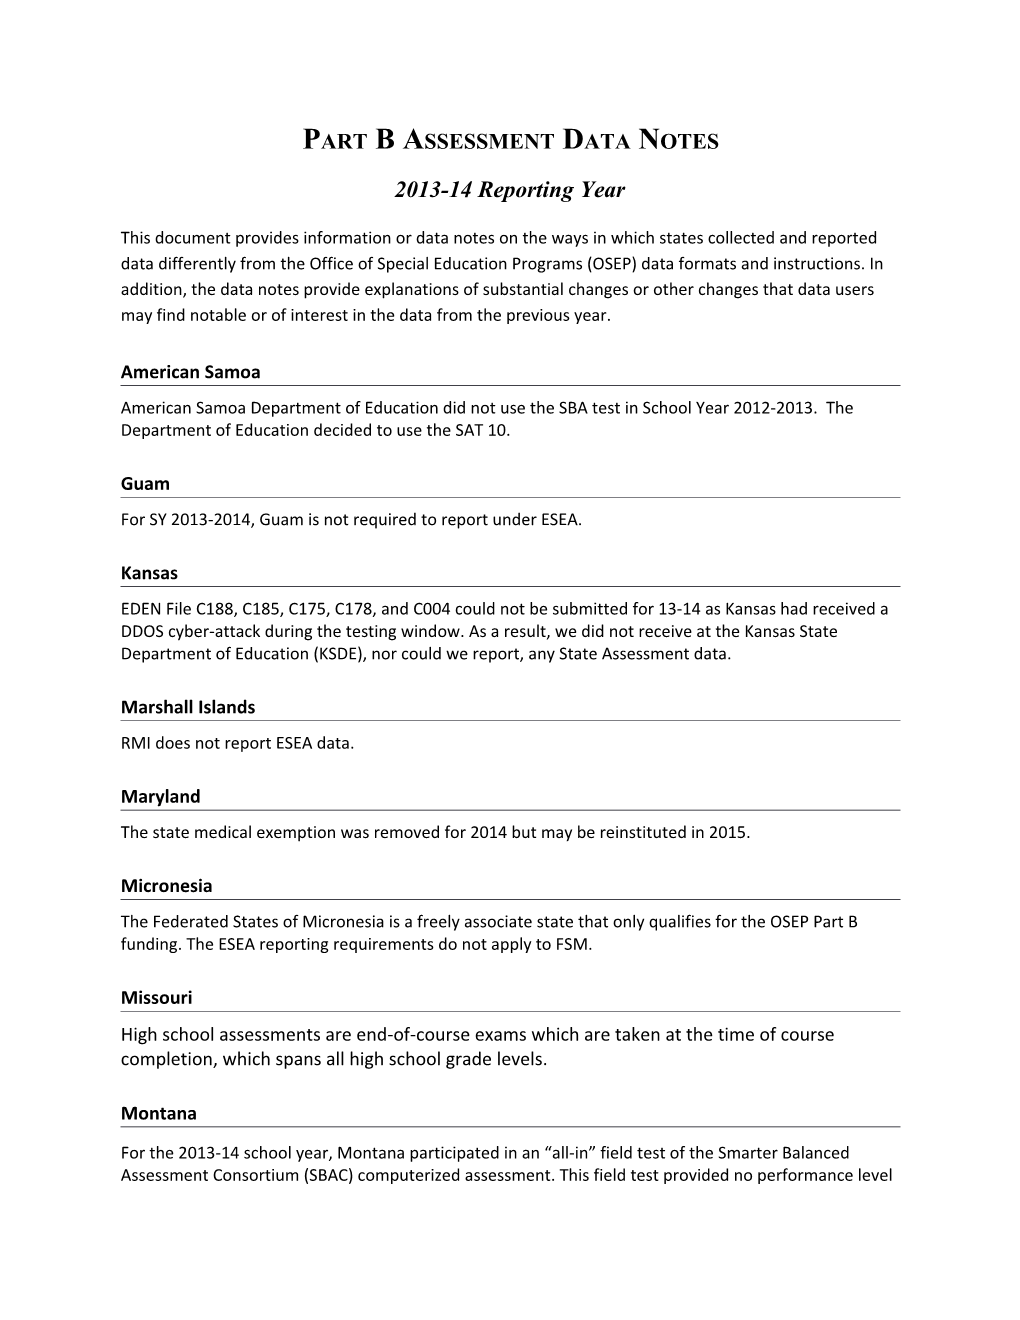 Part B Assessment Data Notes 2013-14 Reporting Year (MS Word)